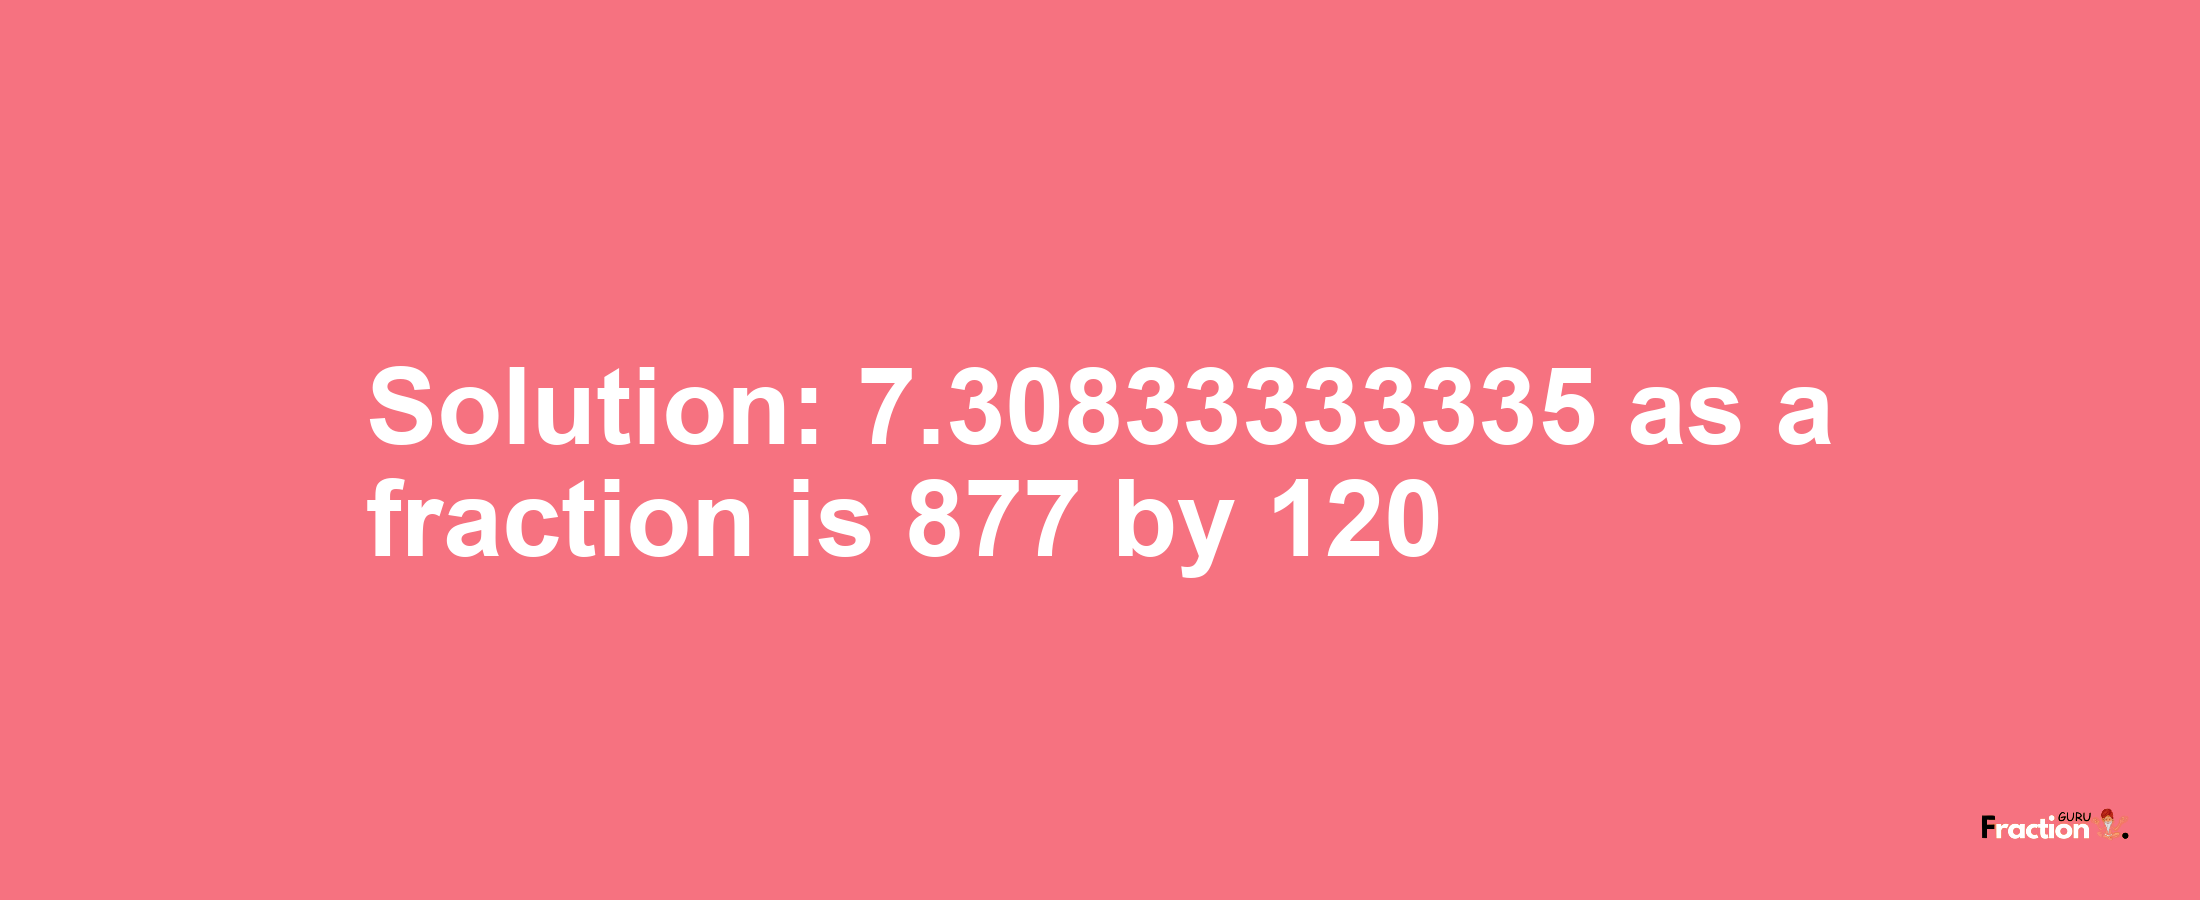 Solution:7.30833333335 as a fraction is 877/120